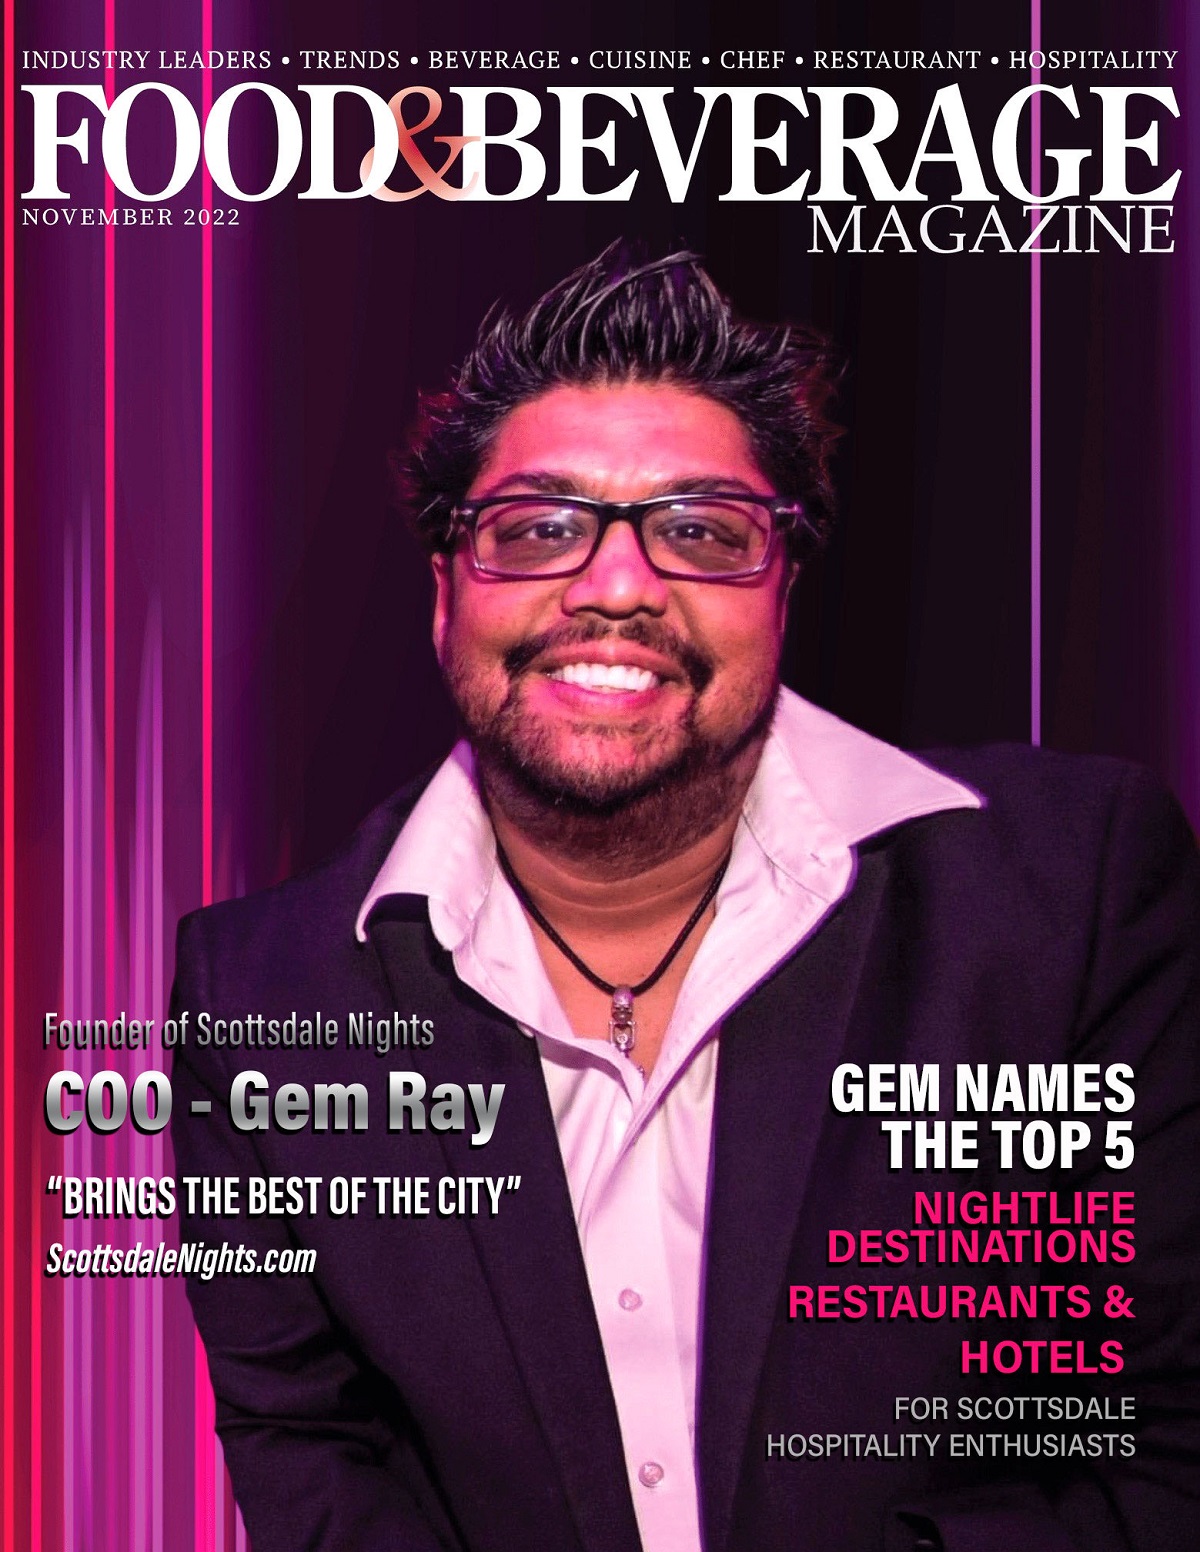 Photo of Gem Ray appearing in Food & Beverage Magazine.